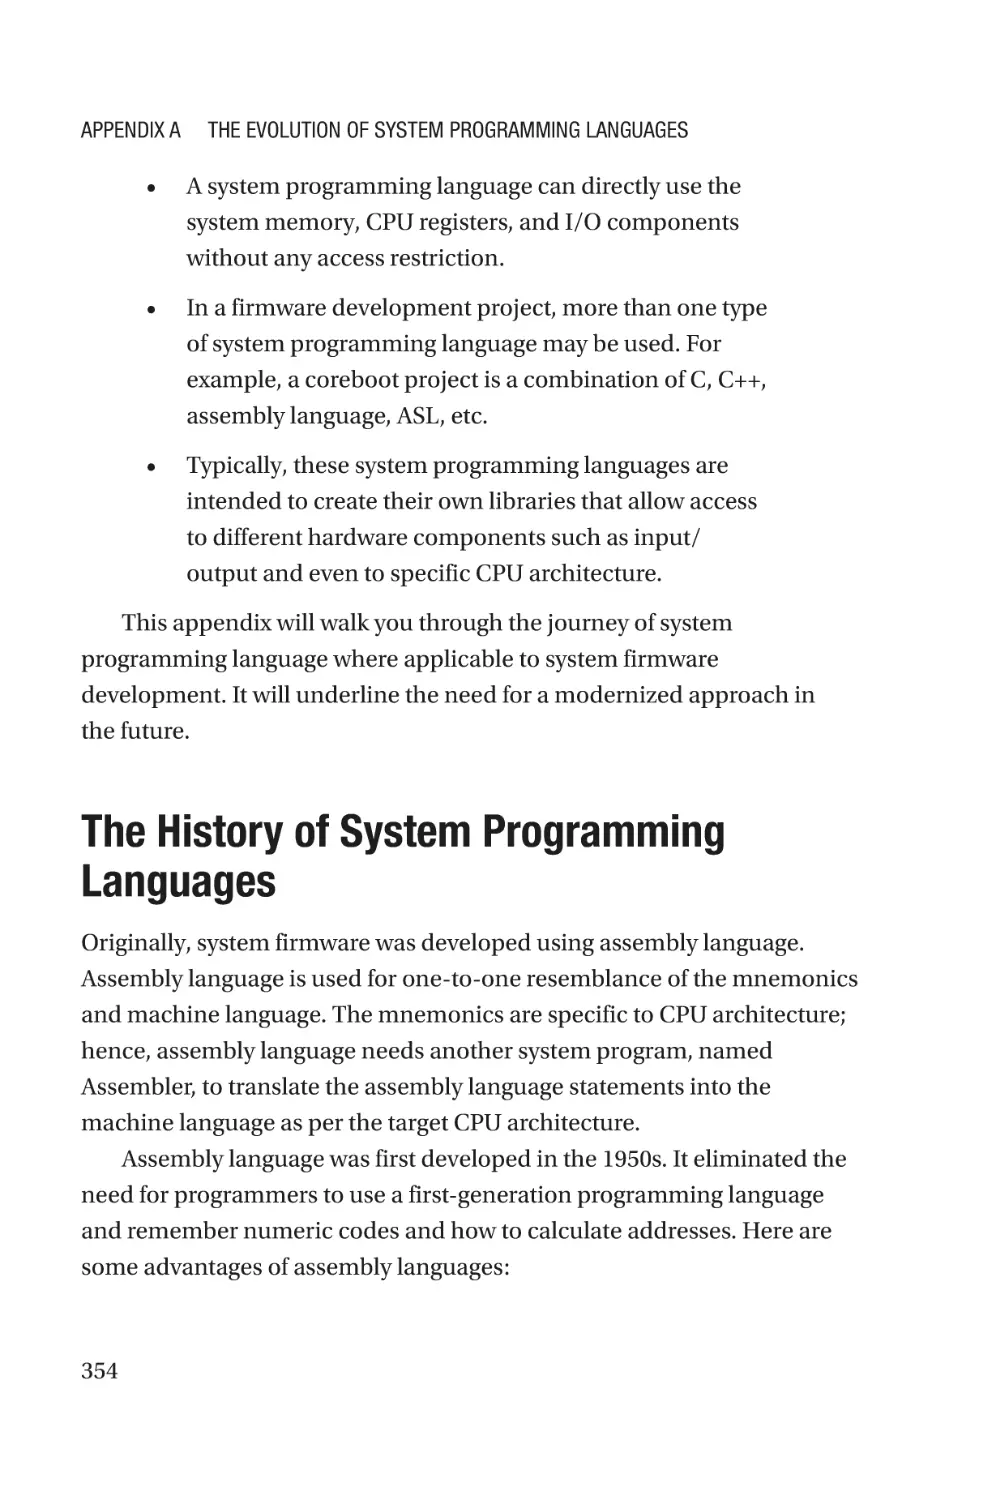 The History of System Programming Languages